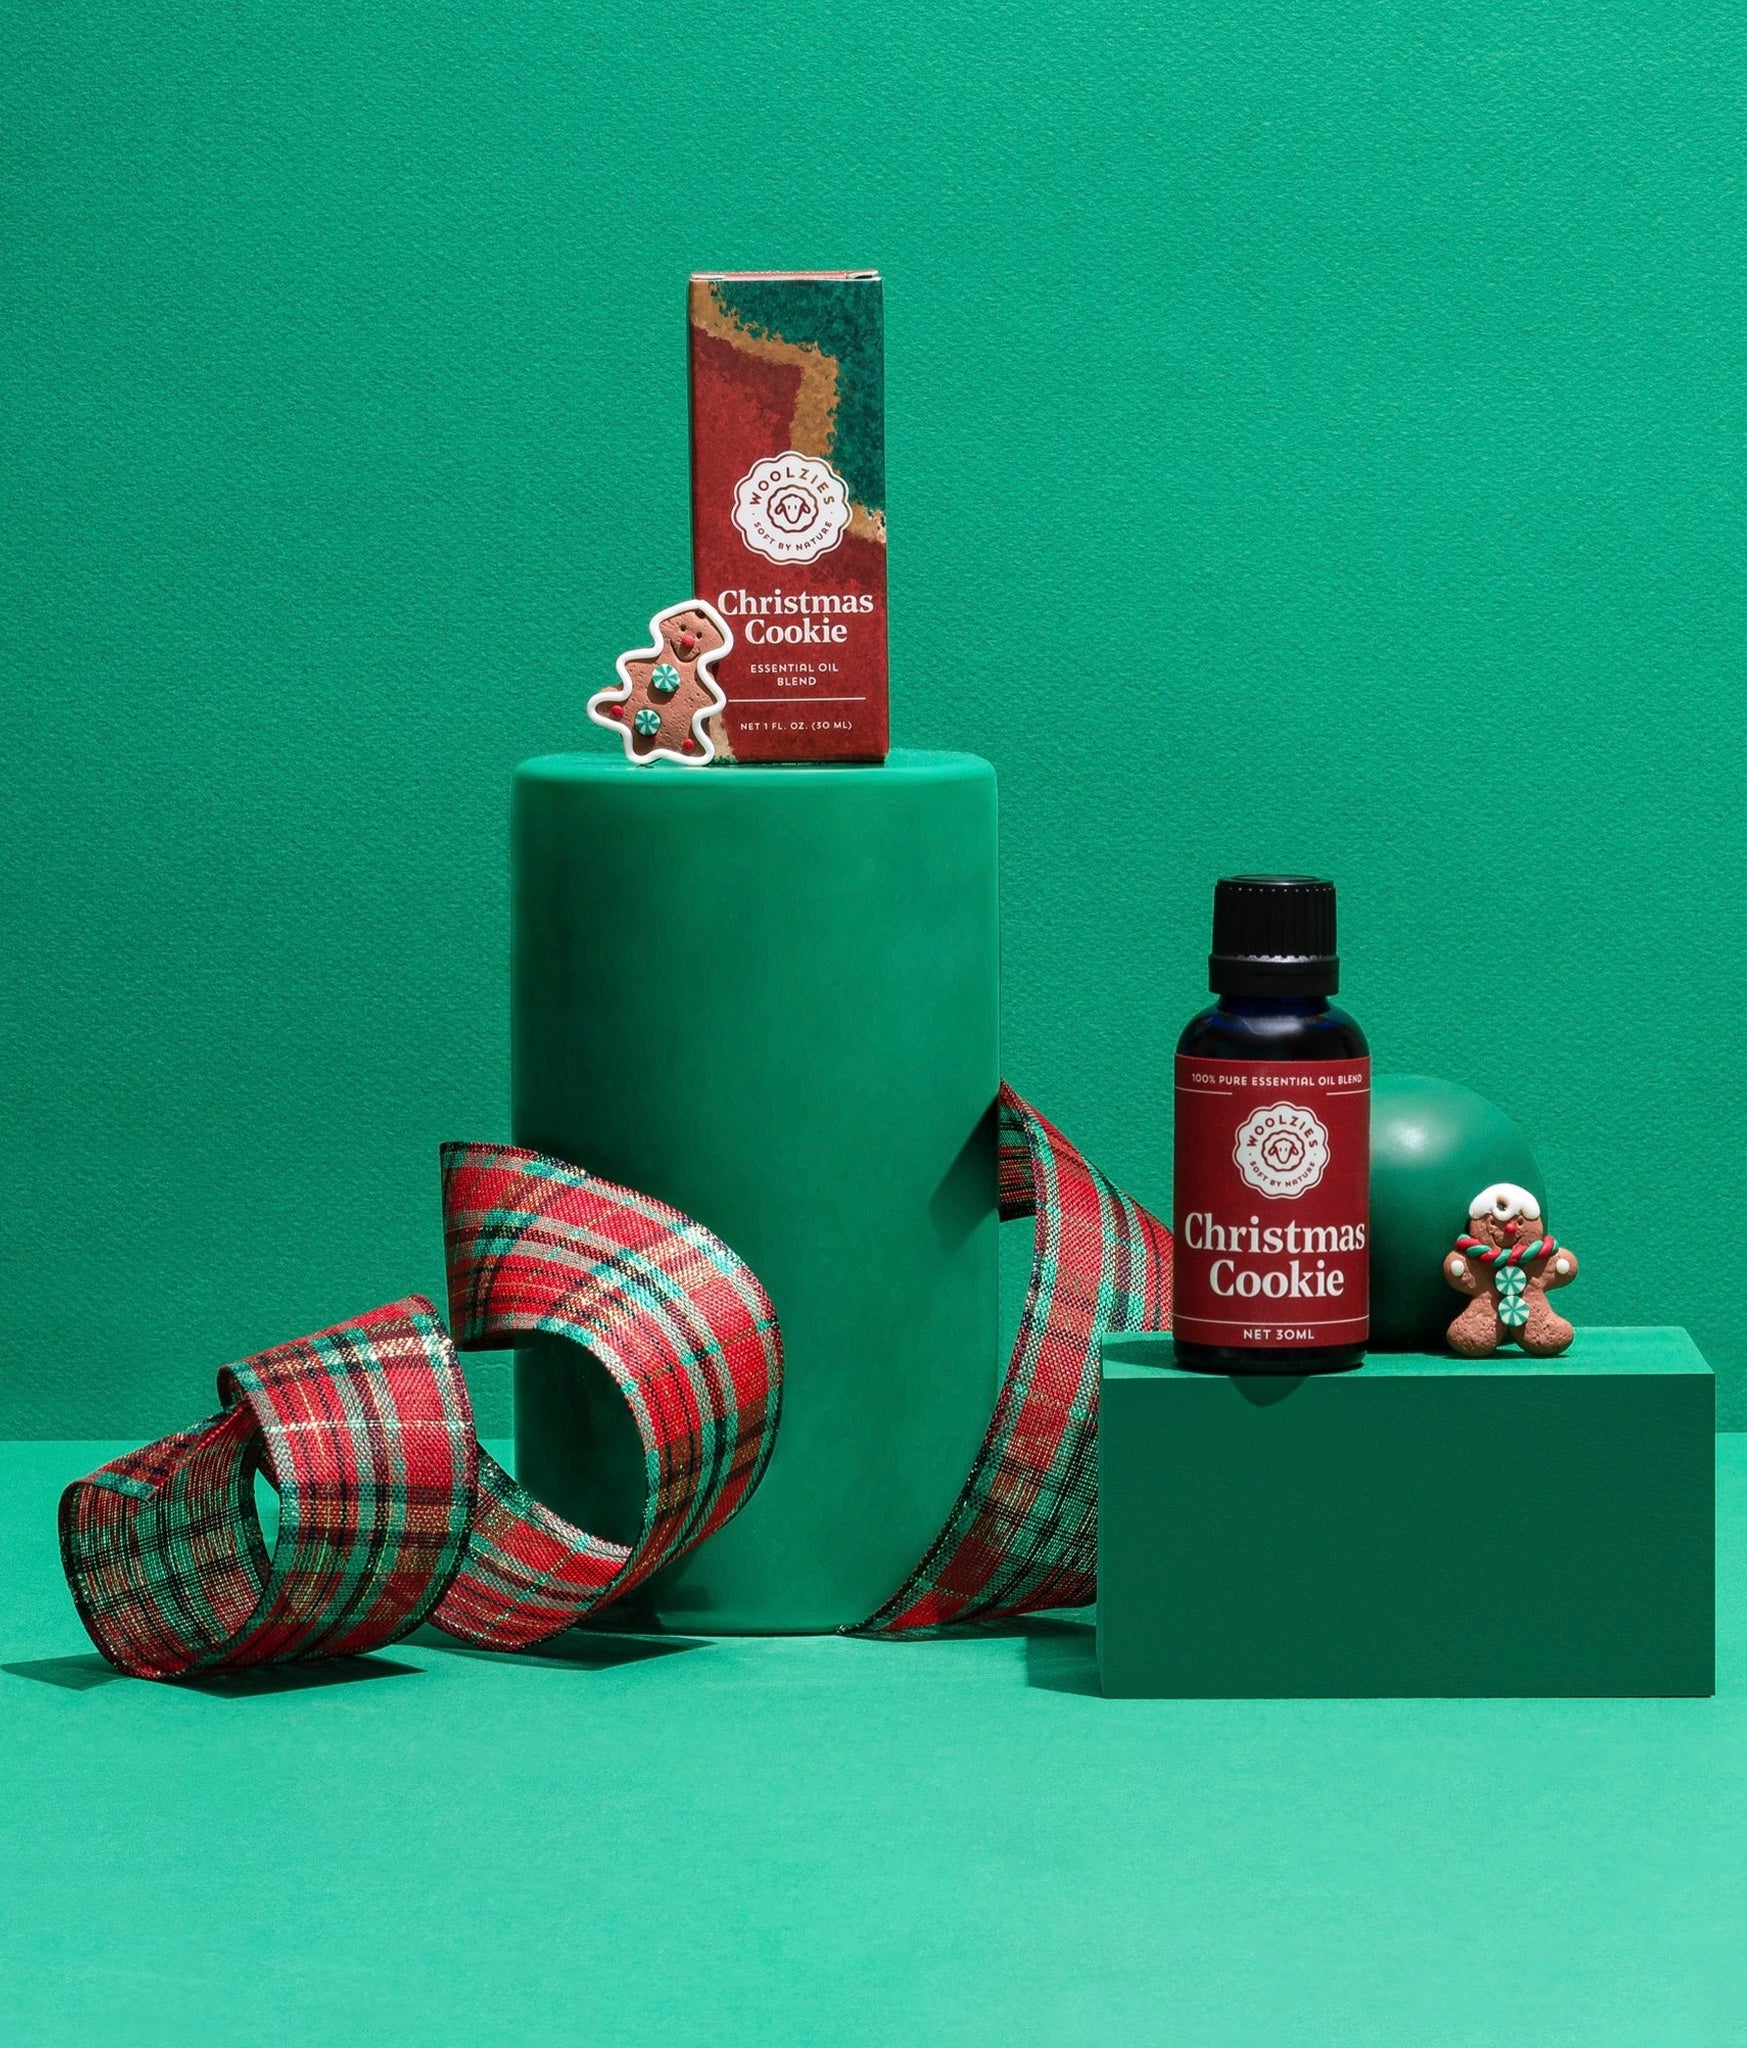  SALUBRITO Winter Essential Oils Set - Christmas Tree, Cinnamon,  Gingerbread, Candy Cane, Spiced Cider, Sugar Cookies, Holiday Fragrance Oils  for Diffuser, Candle, Soap Making : Health & Household